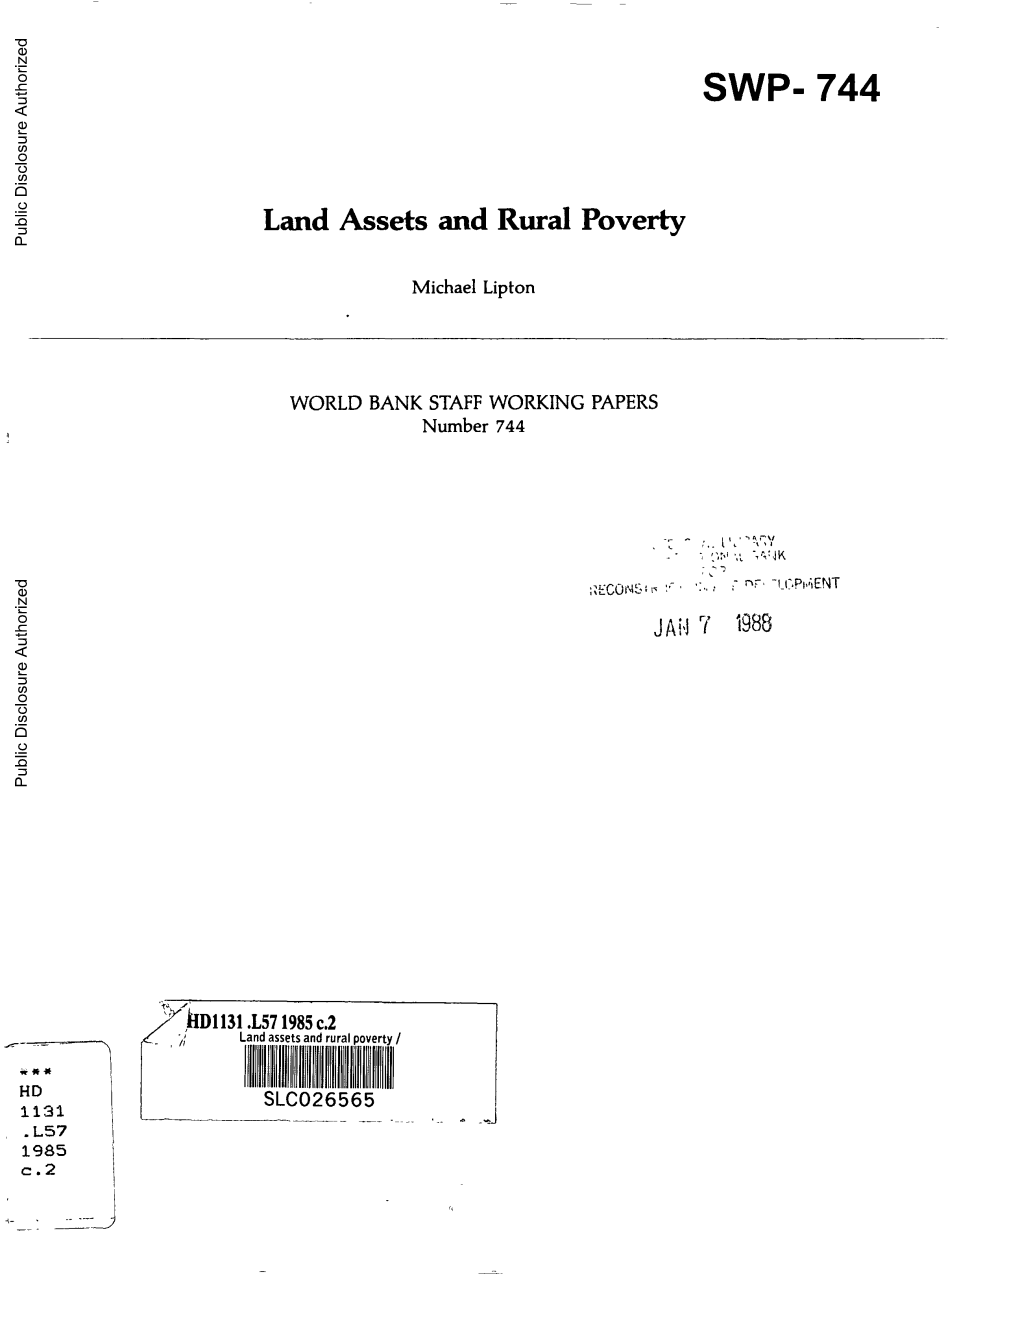 Land Assets and Rural Poverty Public Disclosure Authorized